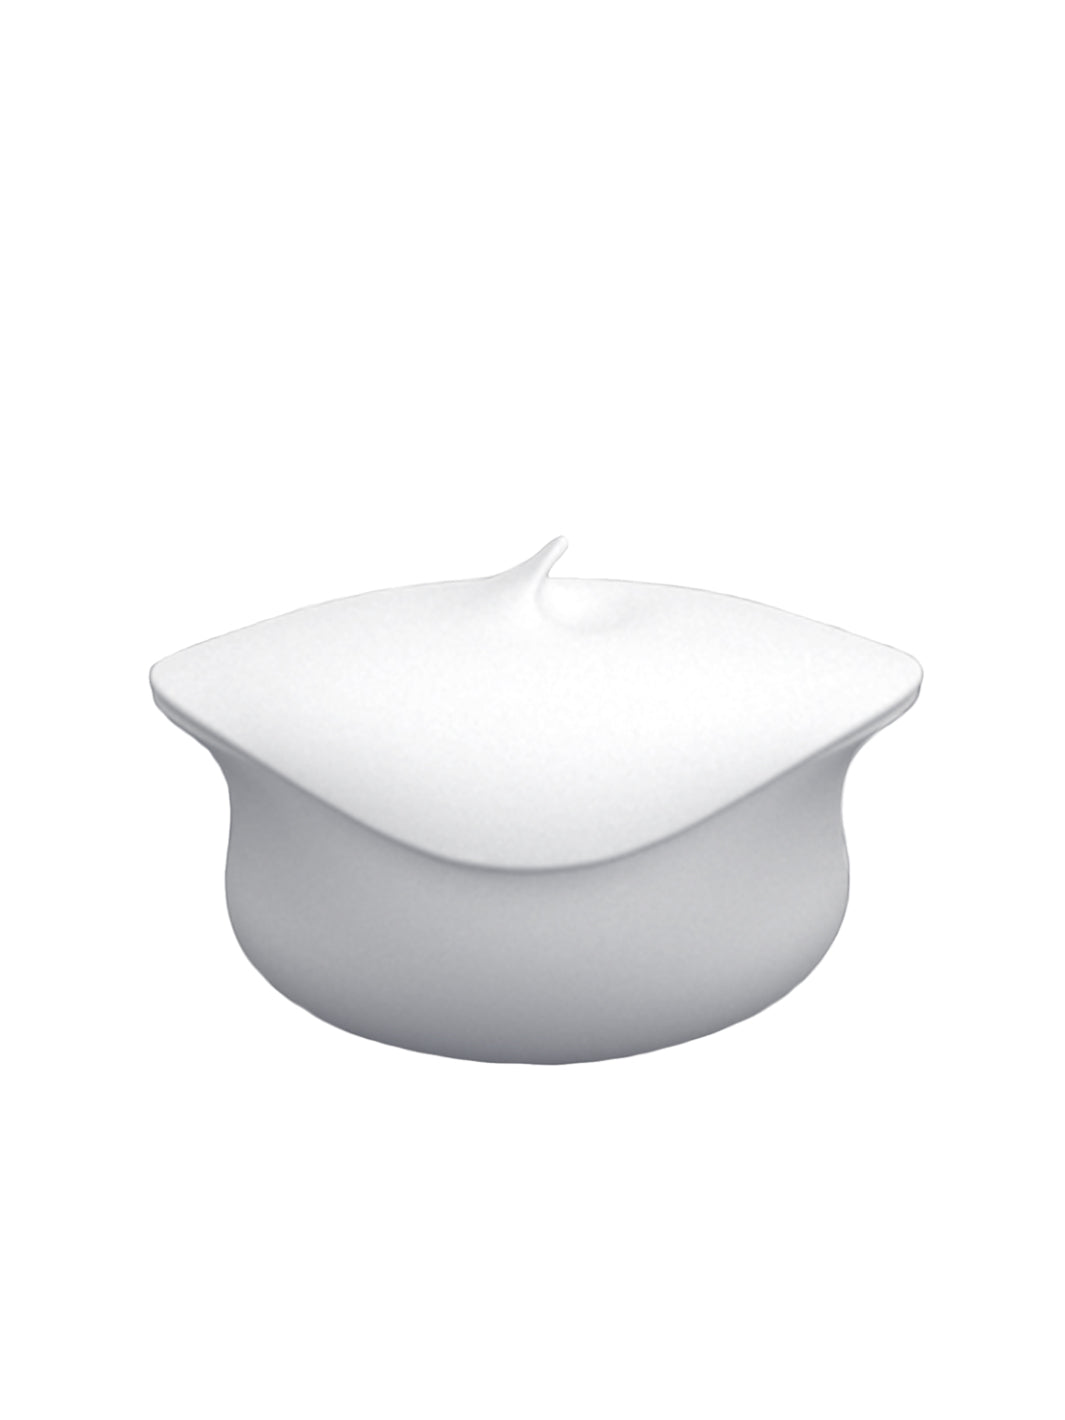 COOKPLAY The Tablet The Pot Serving Bowl (15.5x14.5cm/6.1x5.7in)